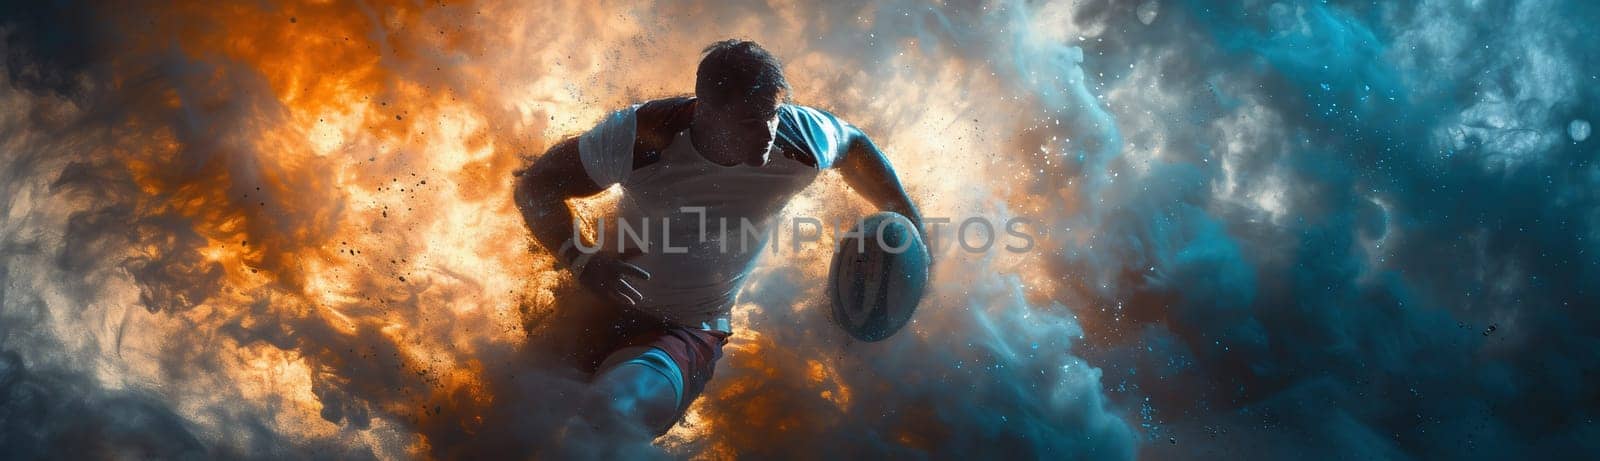 Man rugby player holds ball on dark background. Sports banner. Horizontal copy space background by Andelov13